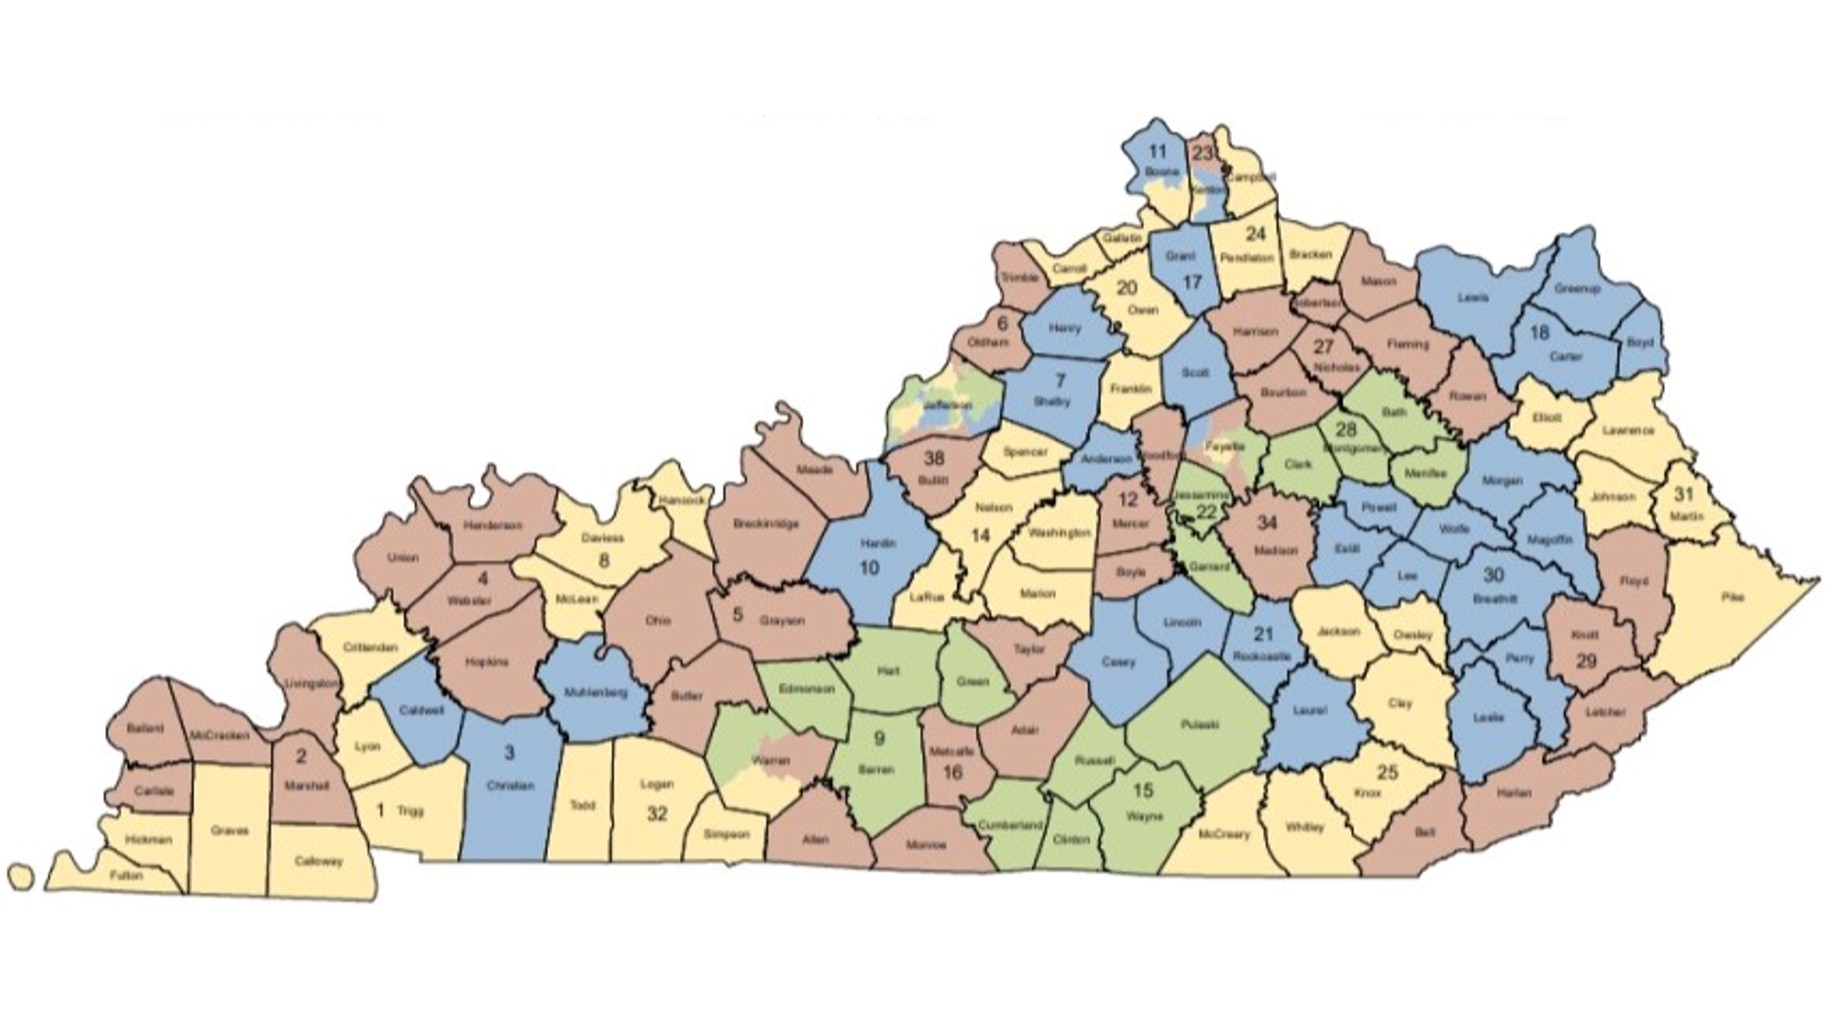 Some changes for Eastern Ky. senate districts